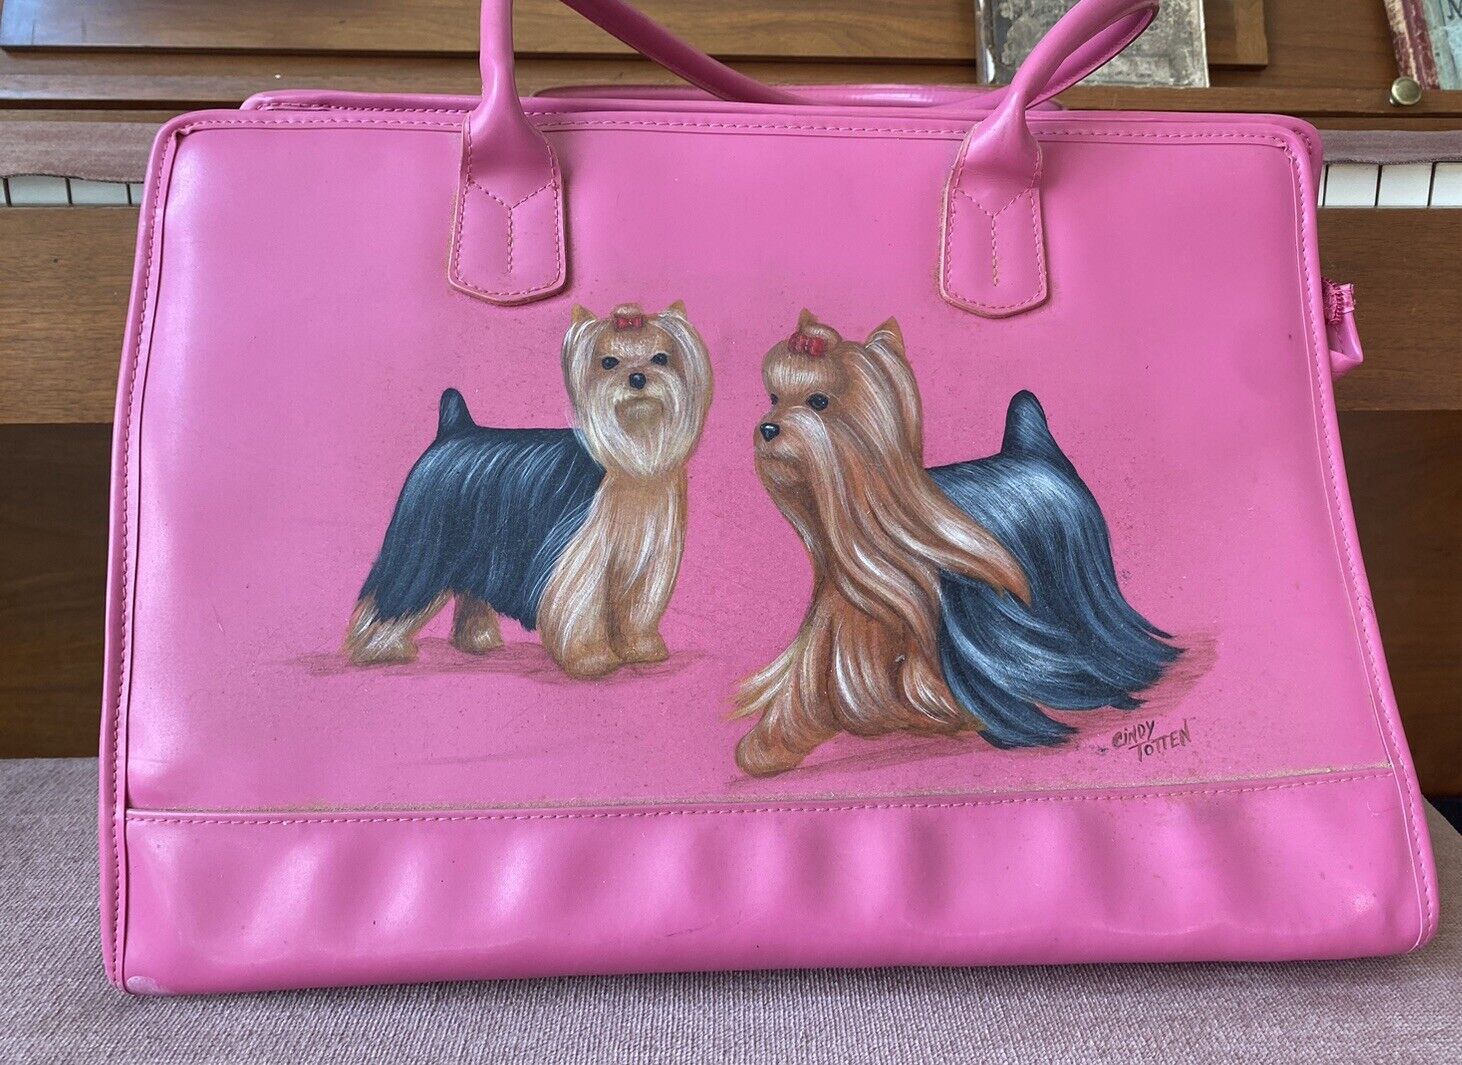 New Pet Dog/Small Yorkie Carrier Hard Sided Comfort Travel Bag Hand Painted Mint